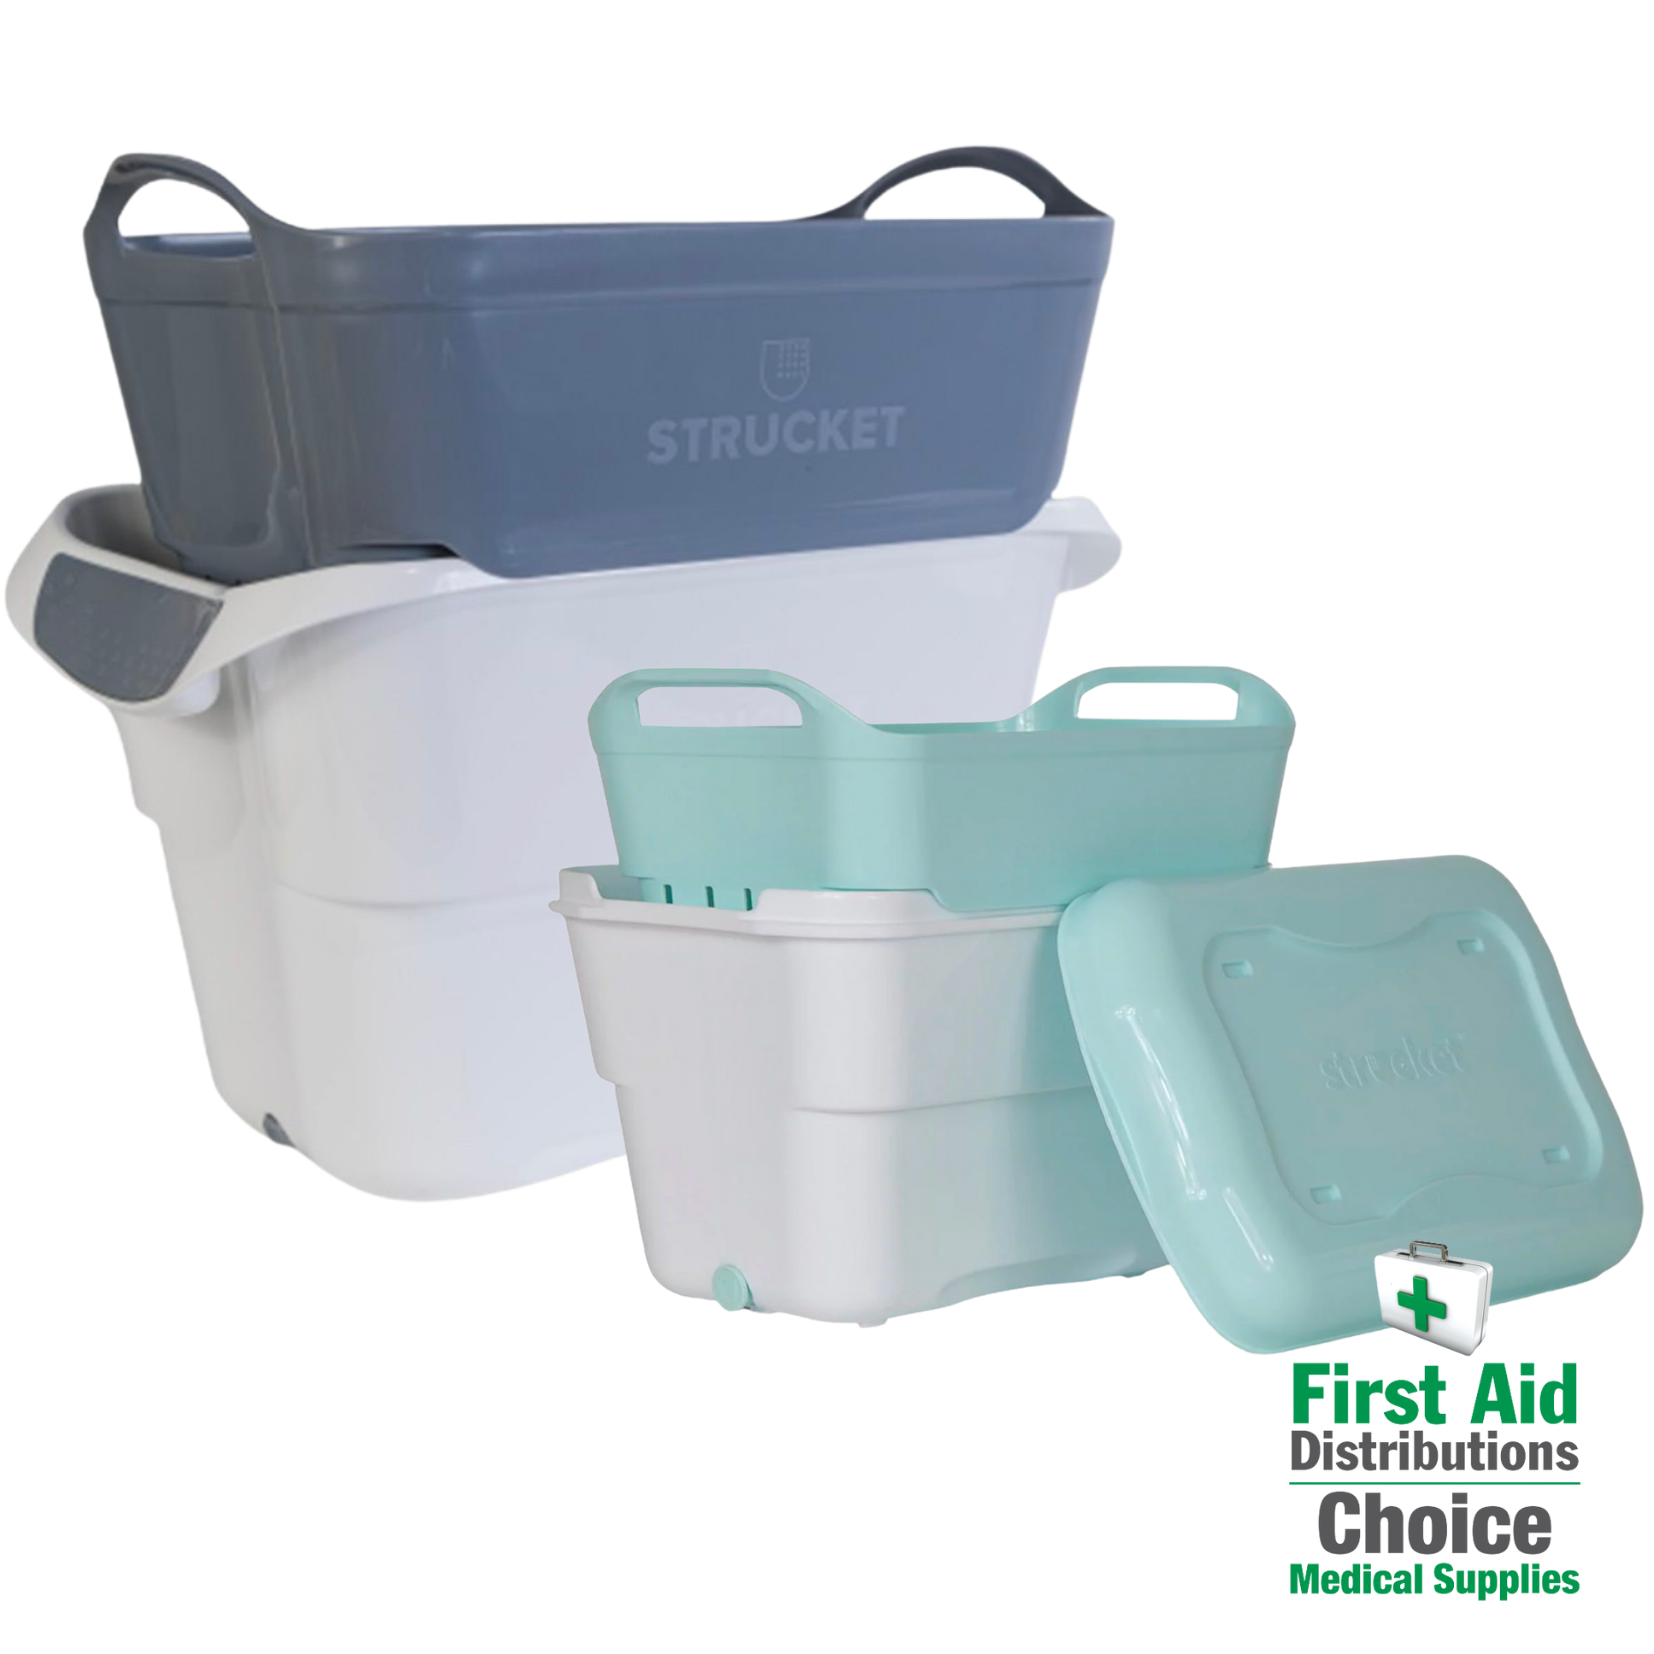 collections/Strucket_Soaker_Bucket_Both_First_Aid_Distributions.png